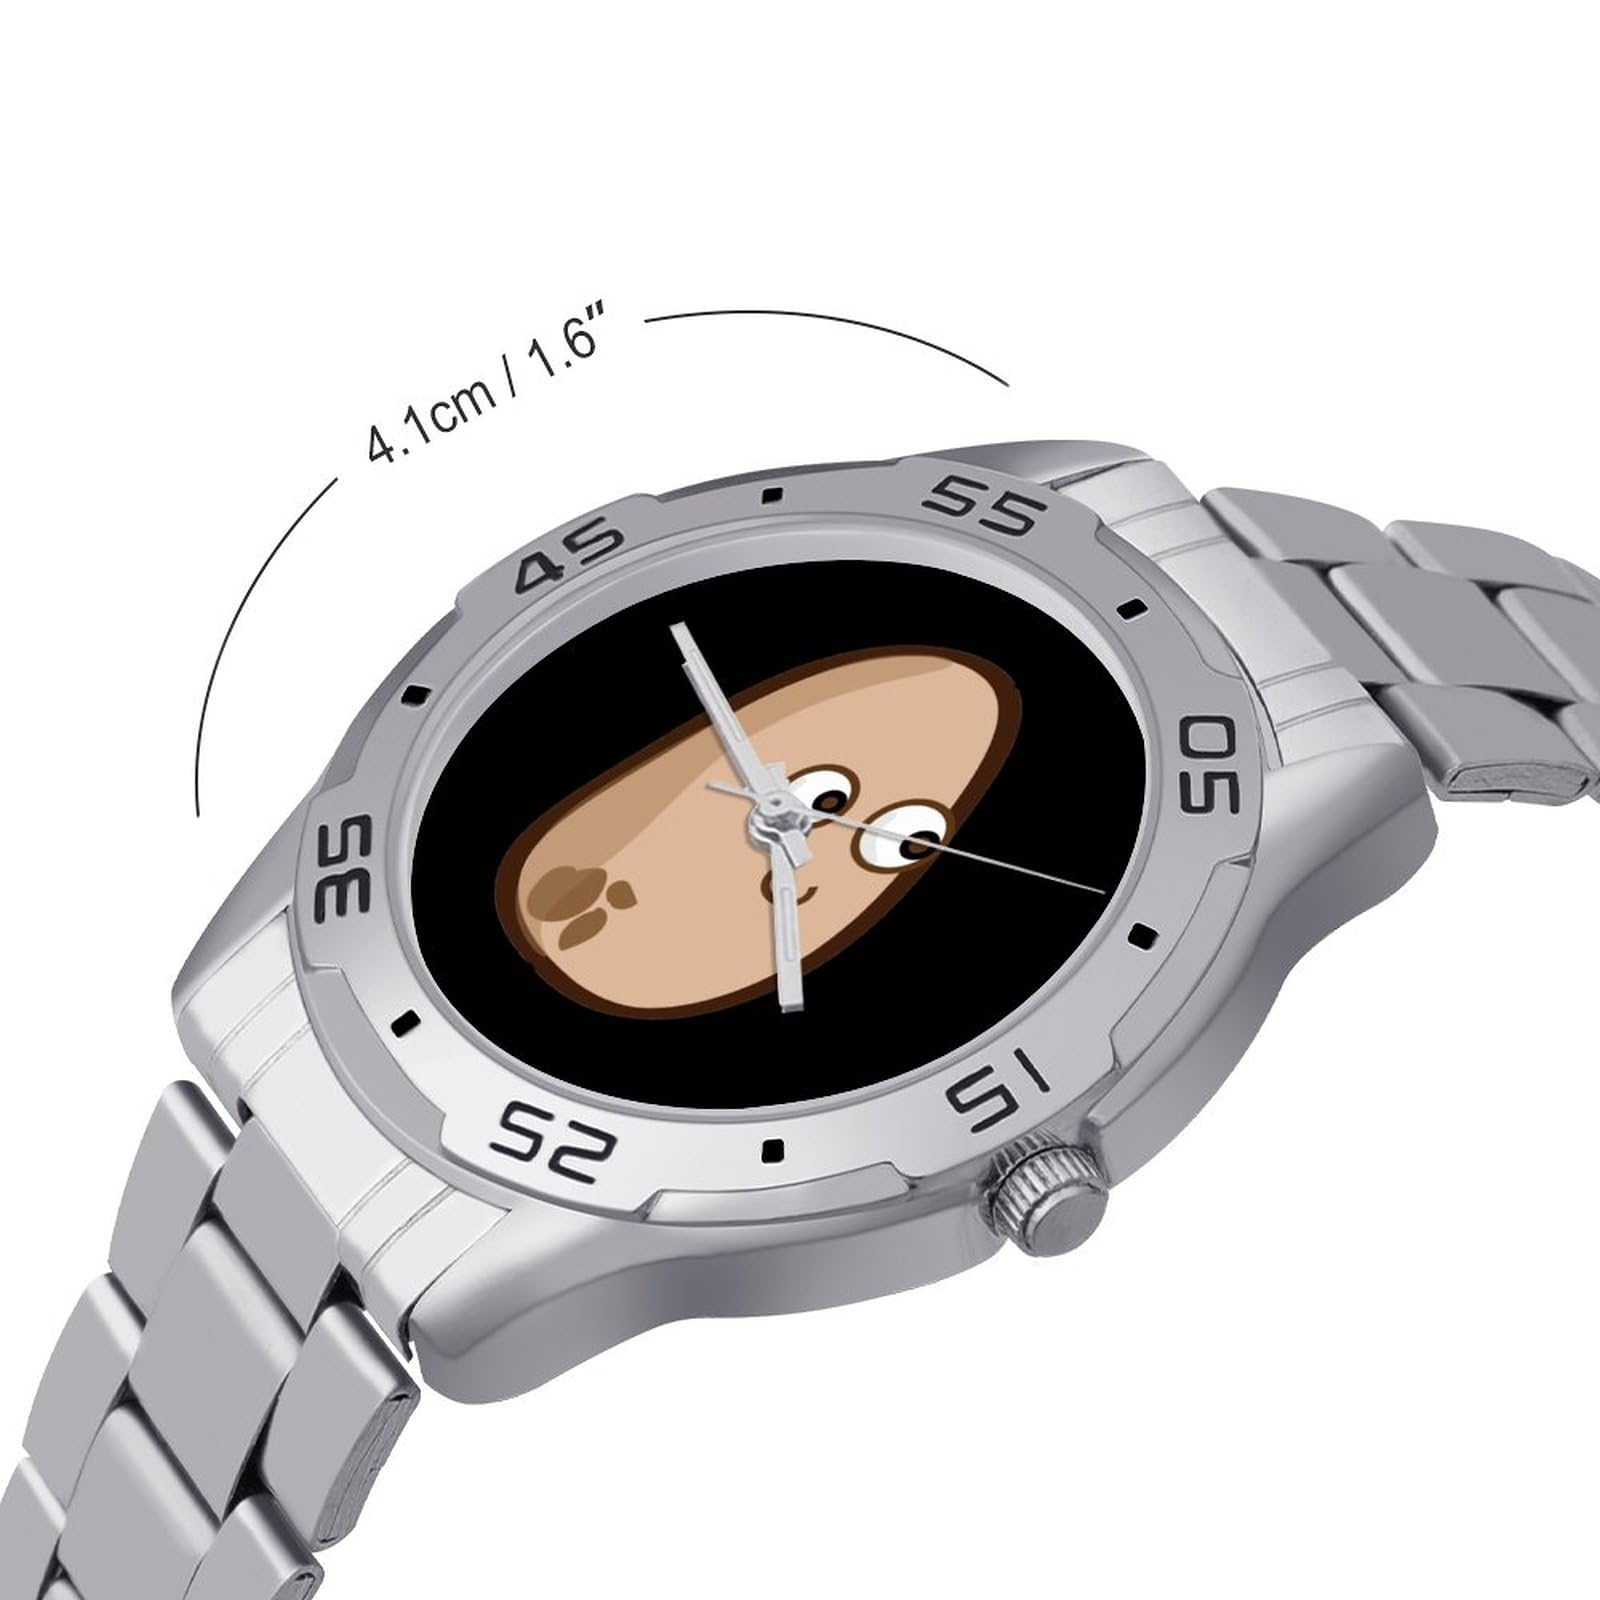 Potatos Stainless Steel Band Business Watch Dress Wrist Unique Luxury Work Casual Waterproof Watches